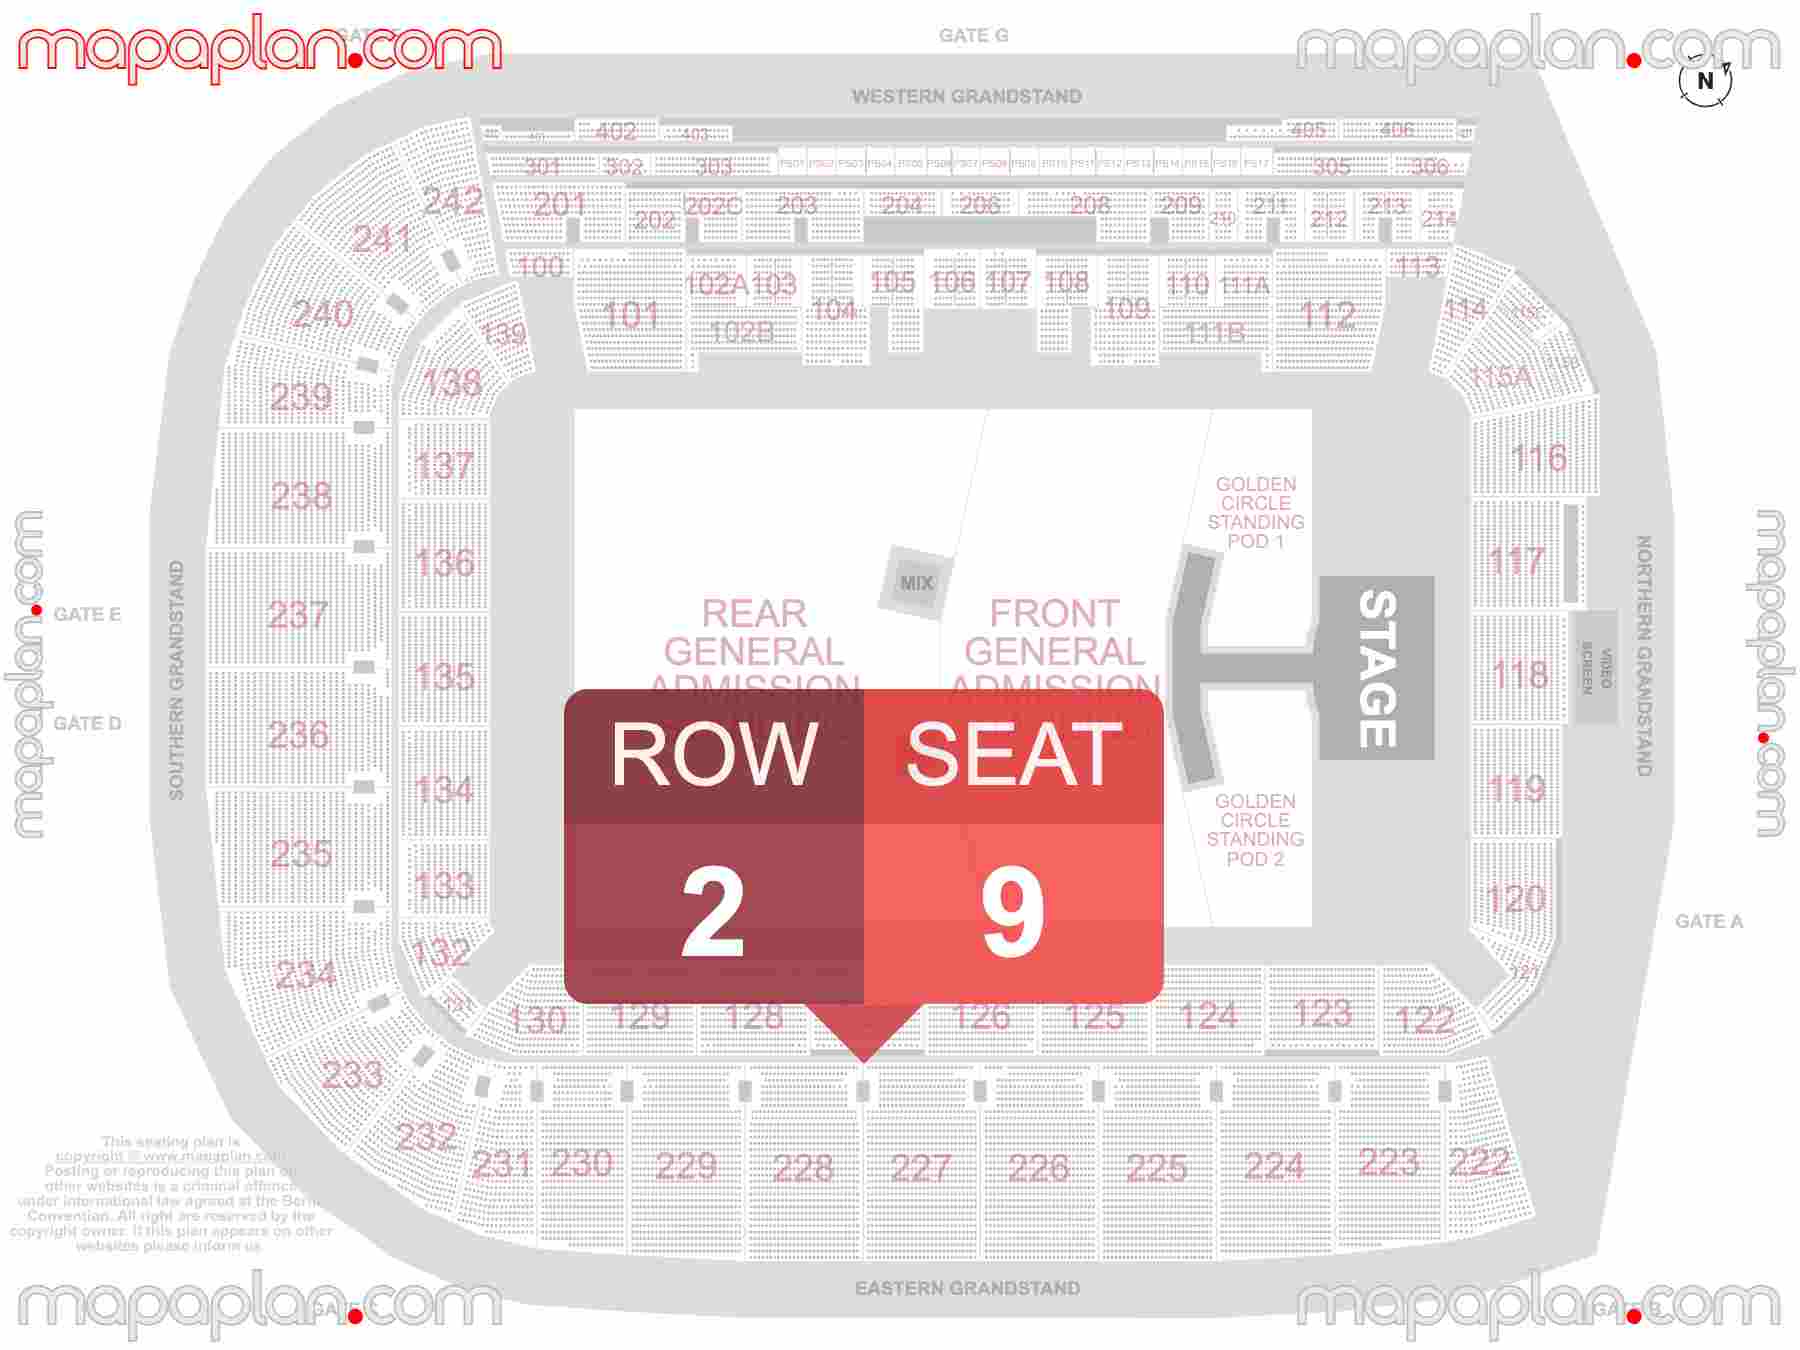 Queensland Country Bank Stadium seating map Concert detailed seat numbers and row numbering map with interactive map plan layout